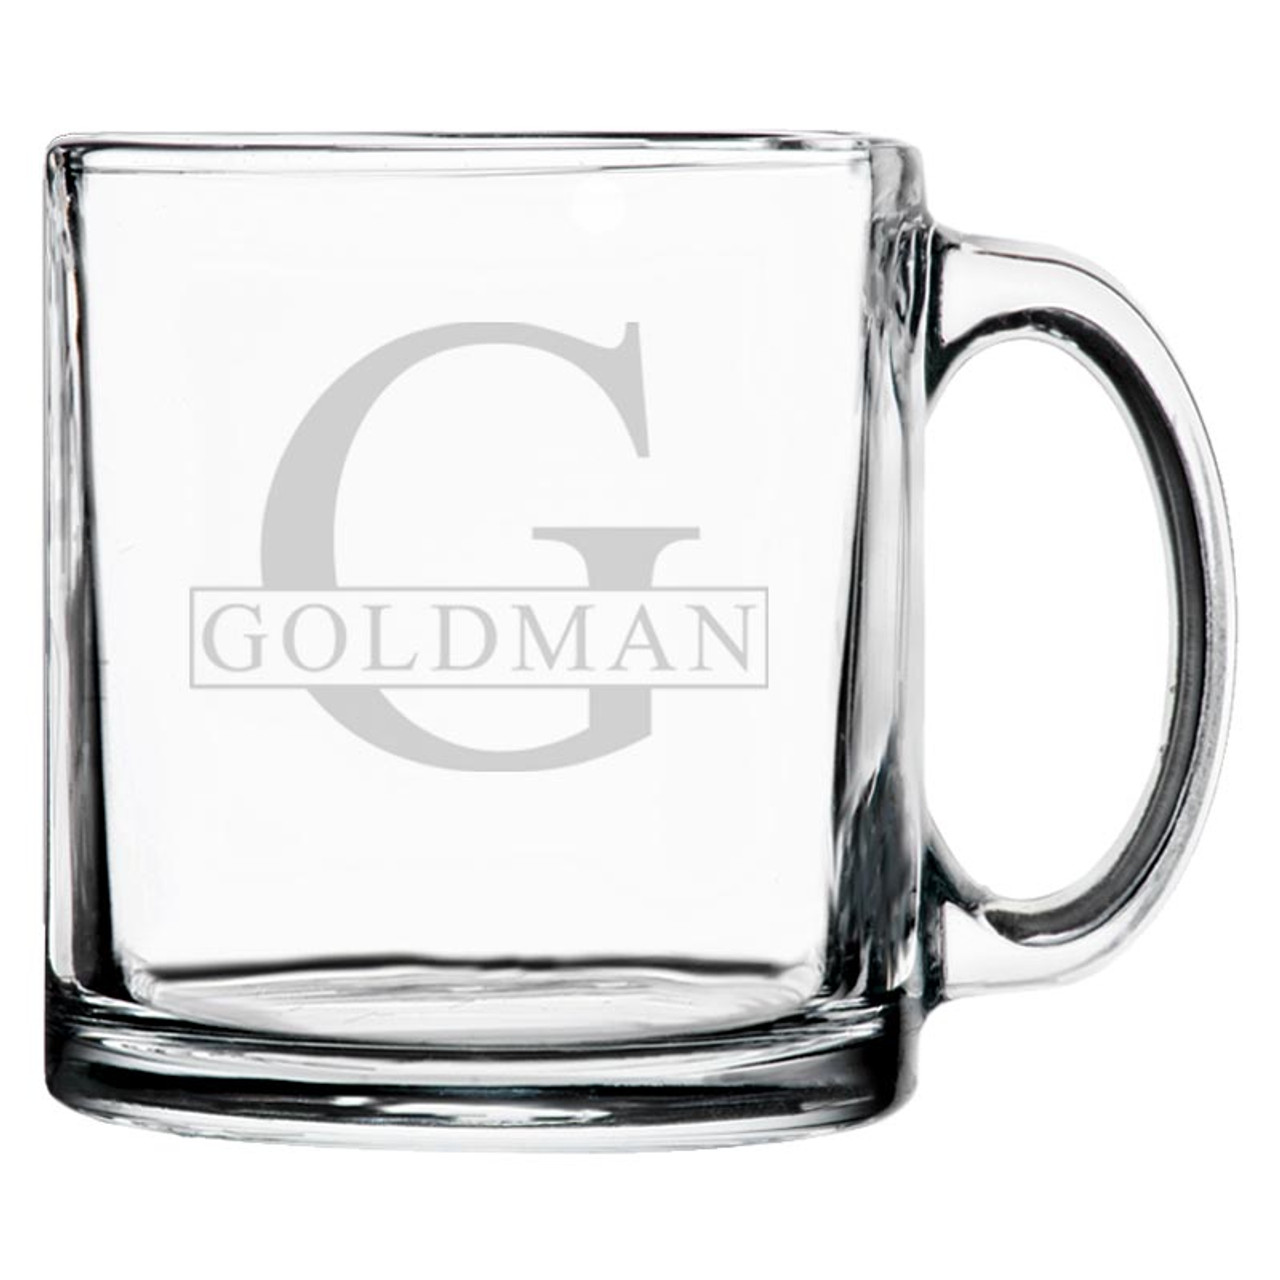 https://cdn11.bigcommerce.com/s-d22a0/images/stencil/1280x1280/products/2499/11777/personalized-coffee-mug-glasses-initial-name-GLS705_coffee__53570.1592247229.jpg?c=2